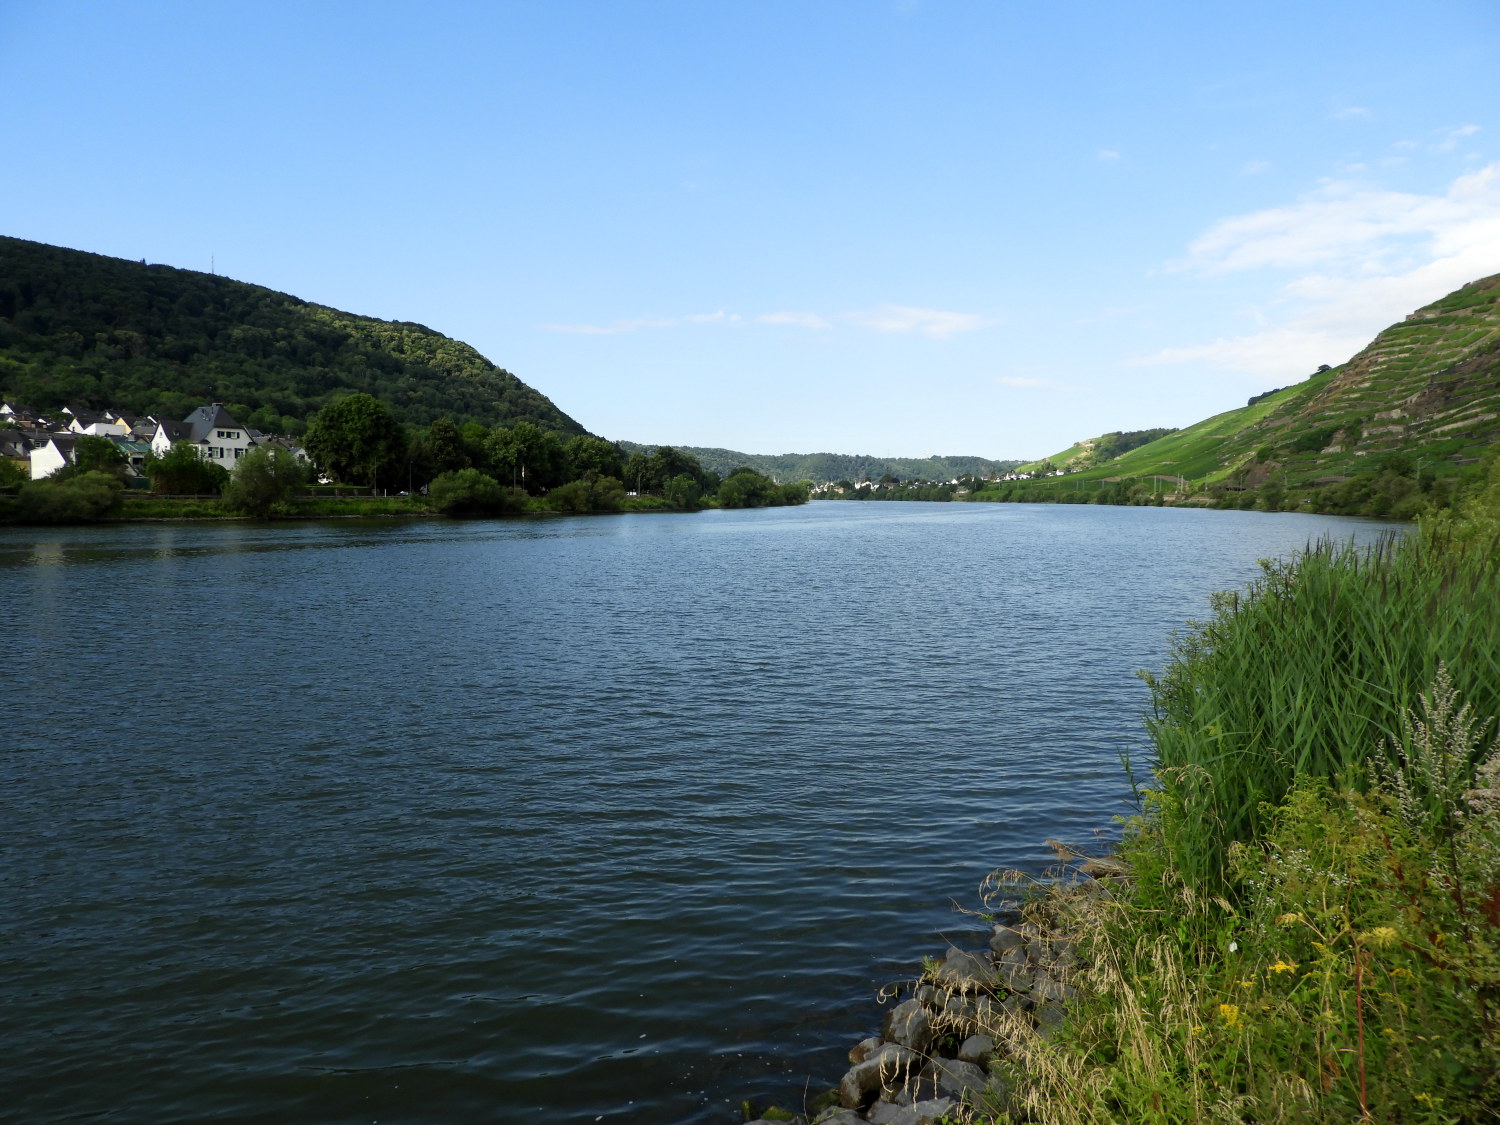 The Mosel River just upstream of Koblenz